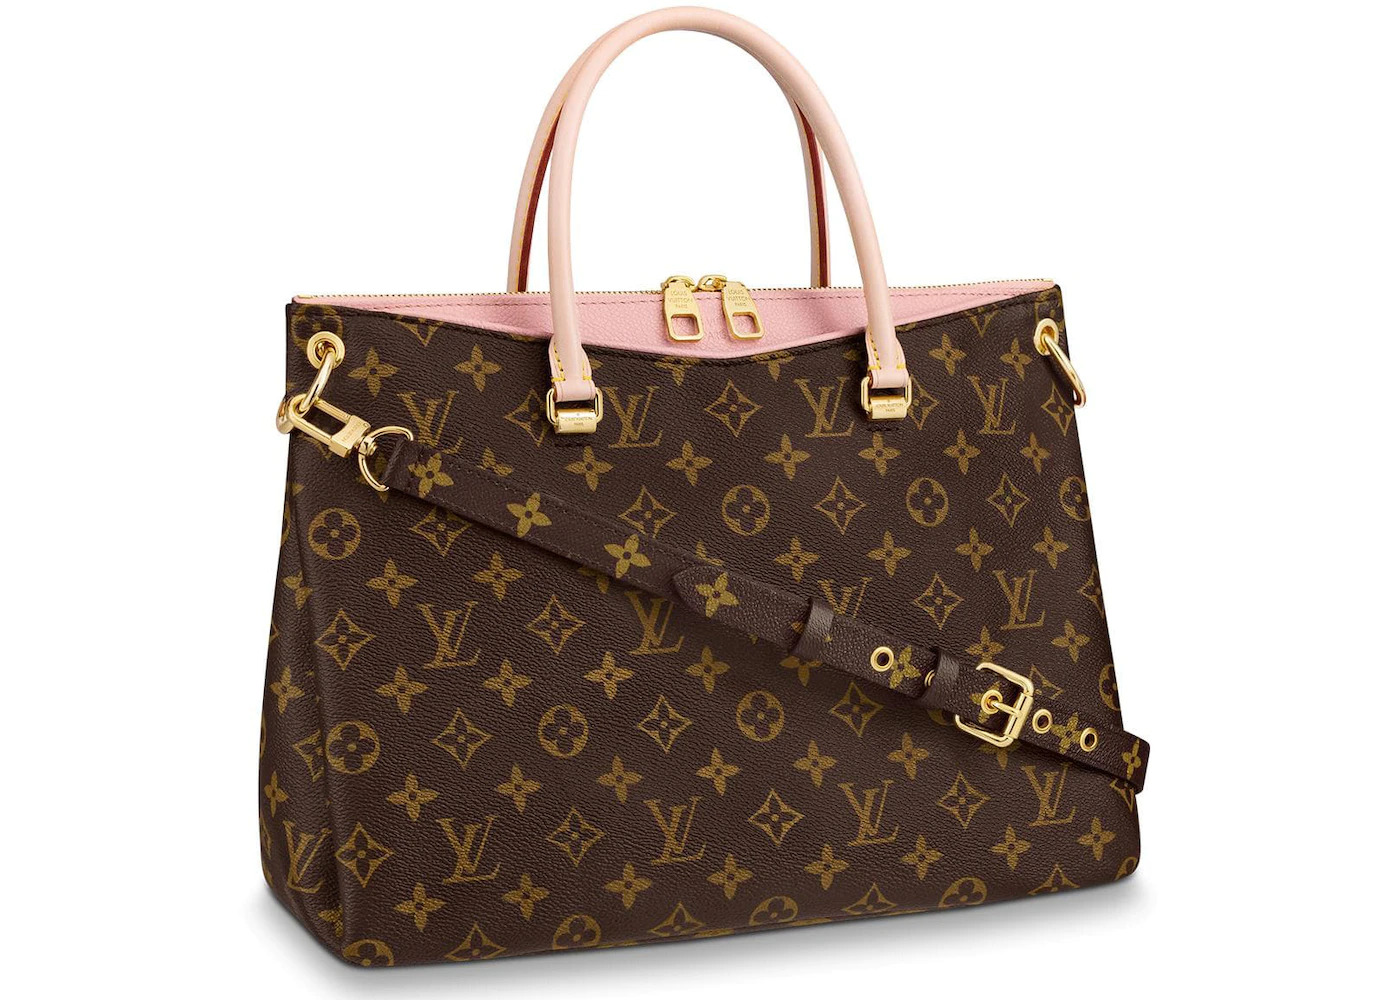 AFFORDABLE LOUIS VUITTON BAG DUPES FROM CONTEMPORARY DESIGNERS